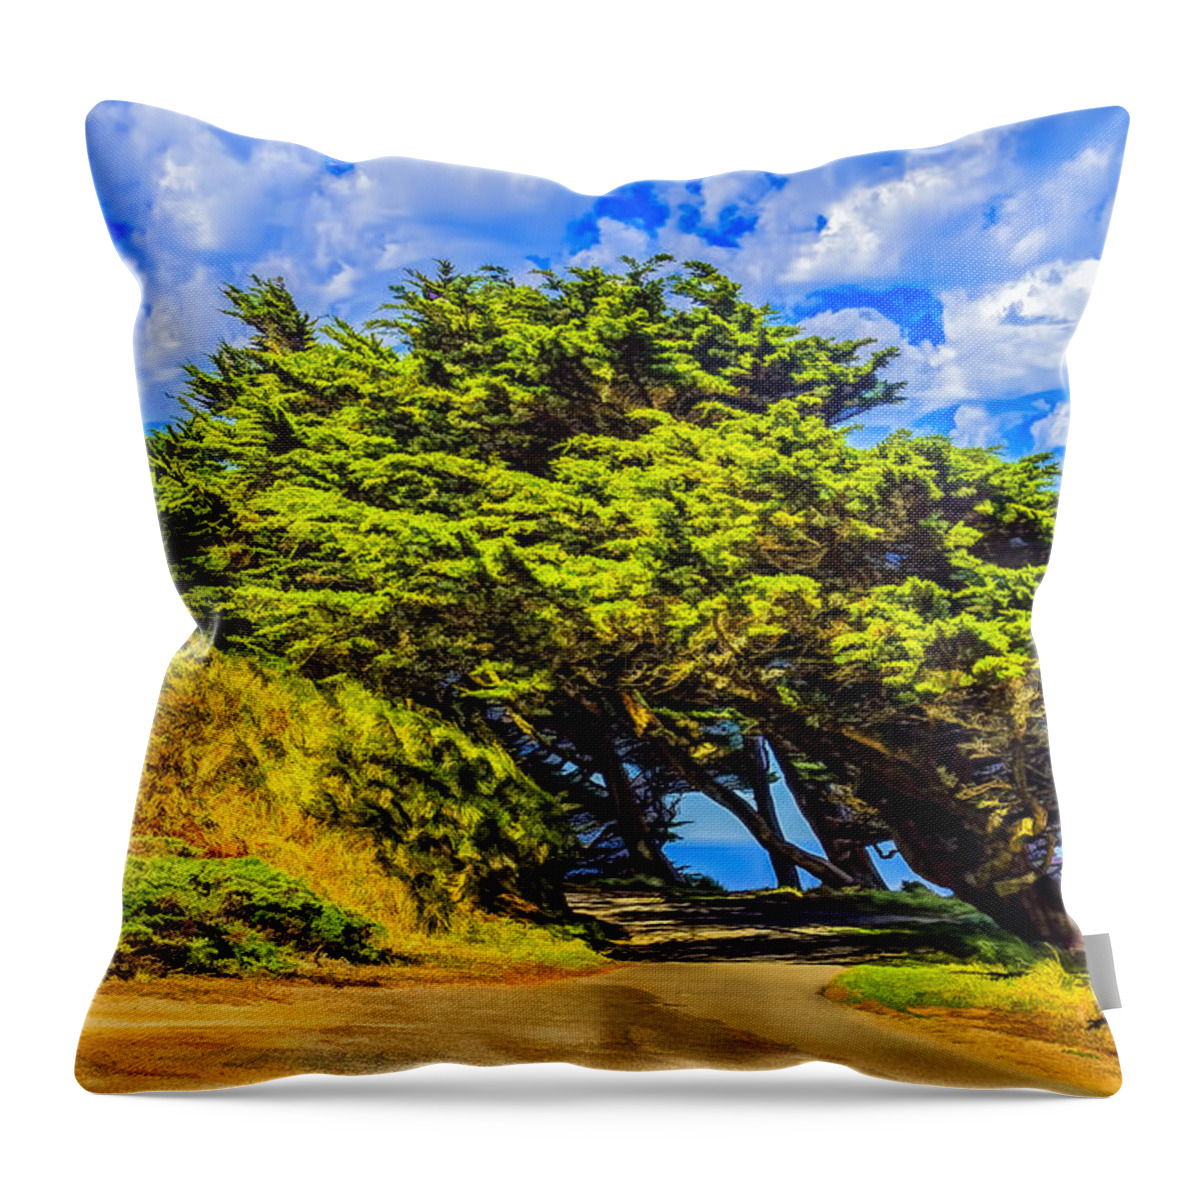 Otw Point Reyes Lancape Throw Pillow featuring the photograph Natural Arches by Bruce Bottomley